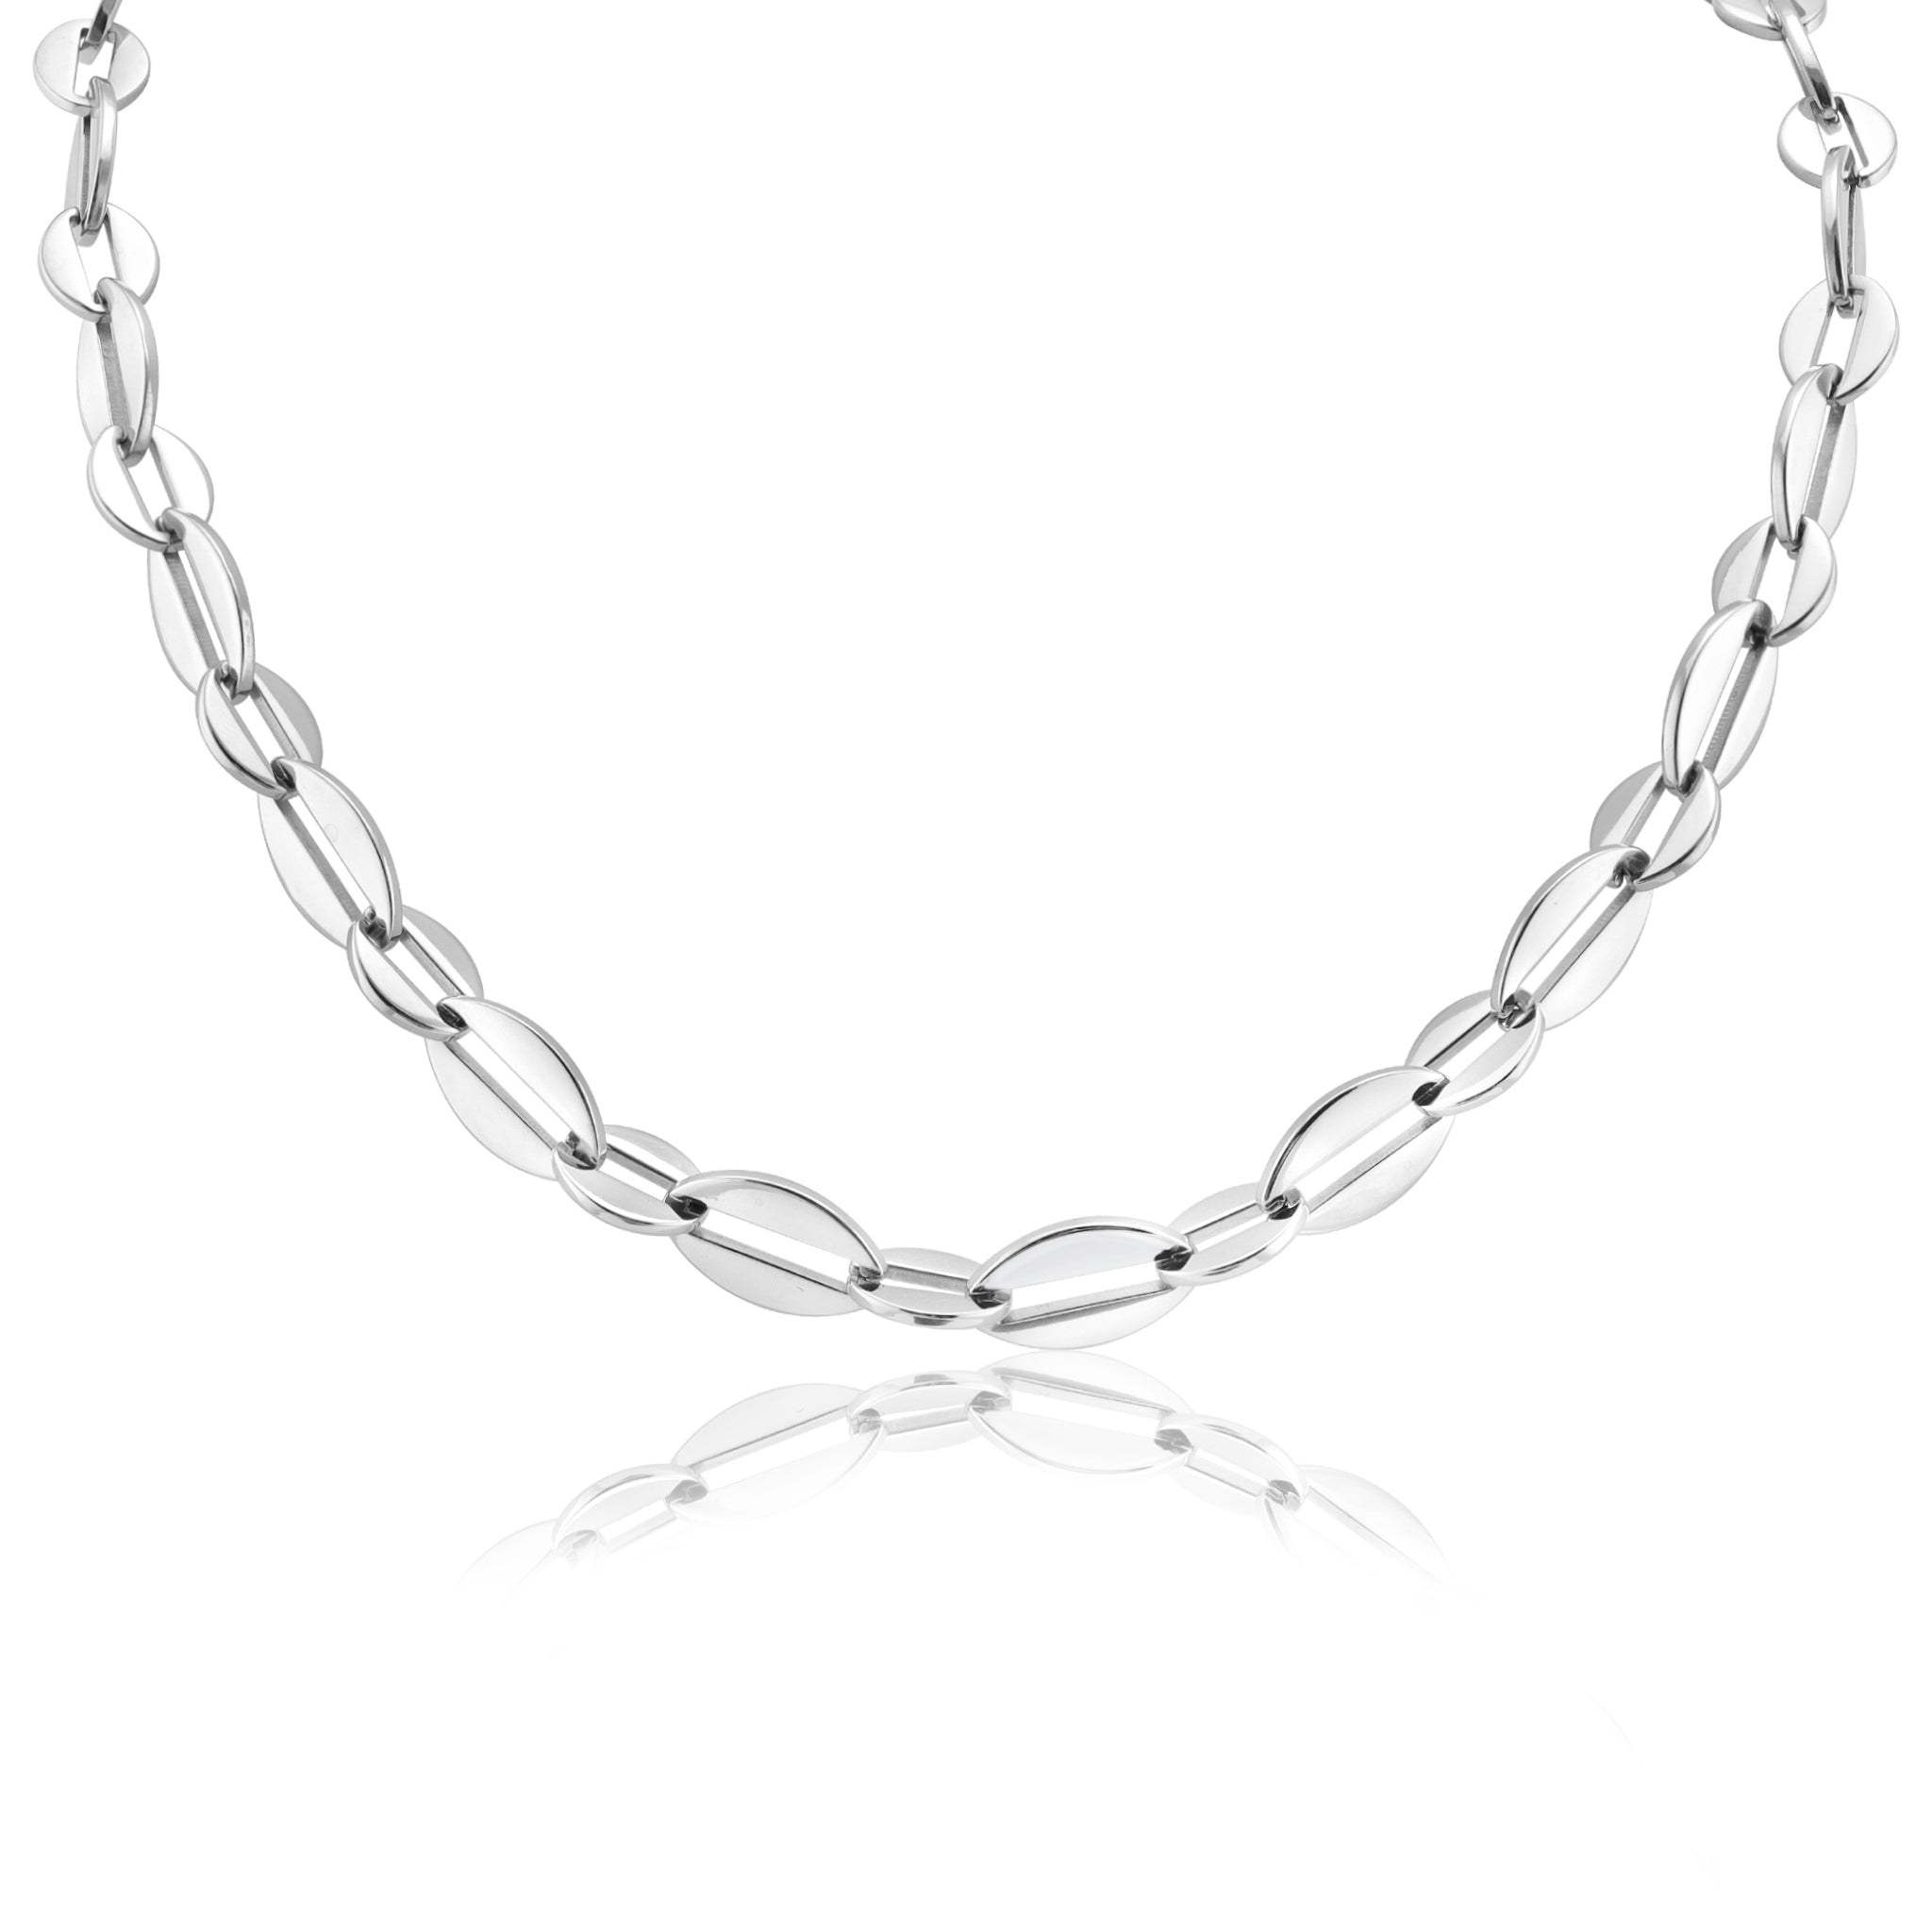 Necklaces Stainless Steel Chain Oval Loop Necklace Chn2463 Wholesale Jewelry Website Unisex